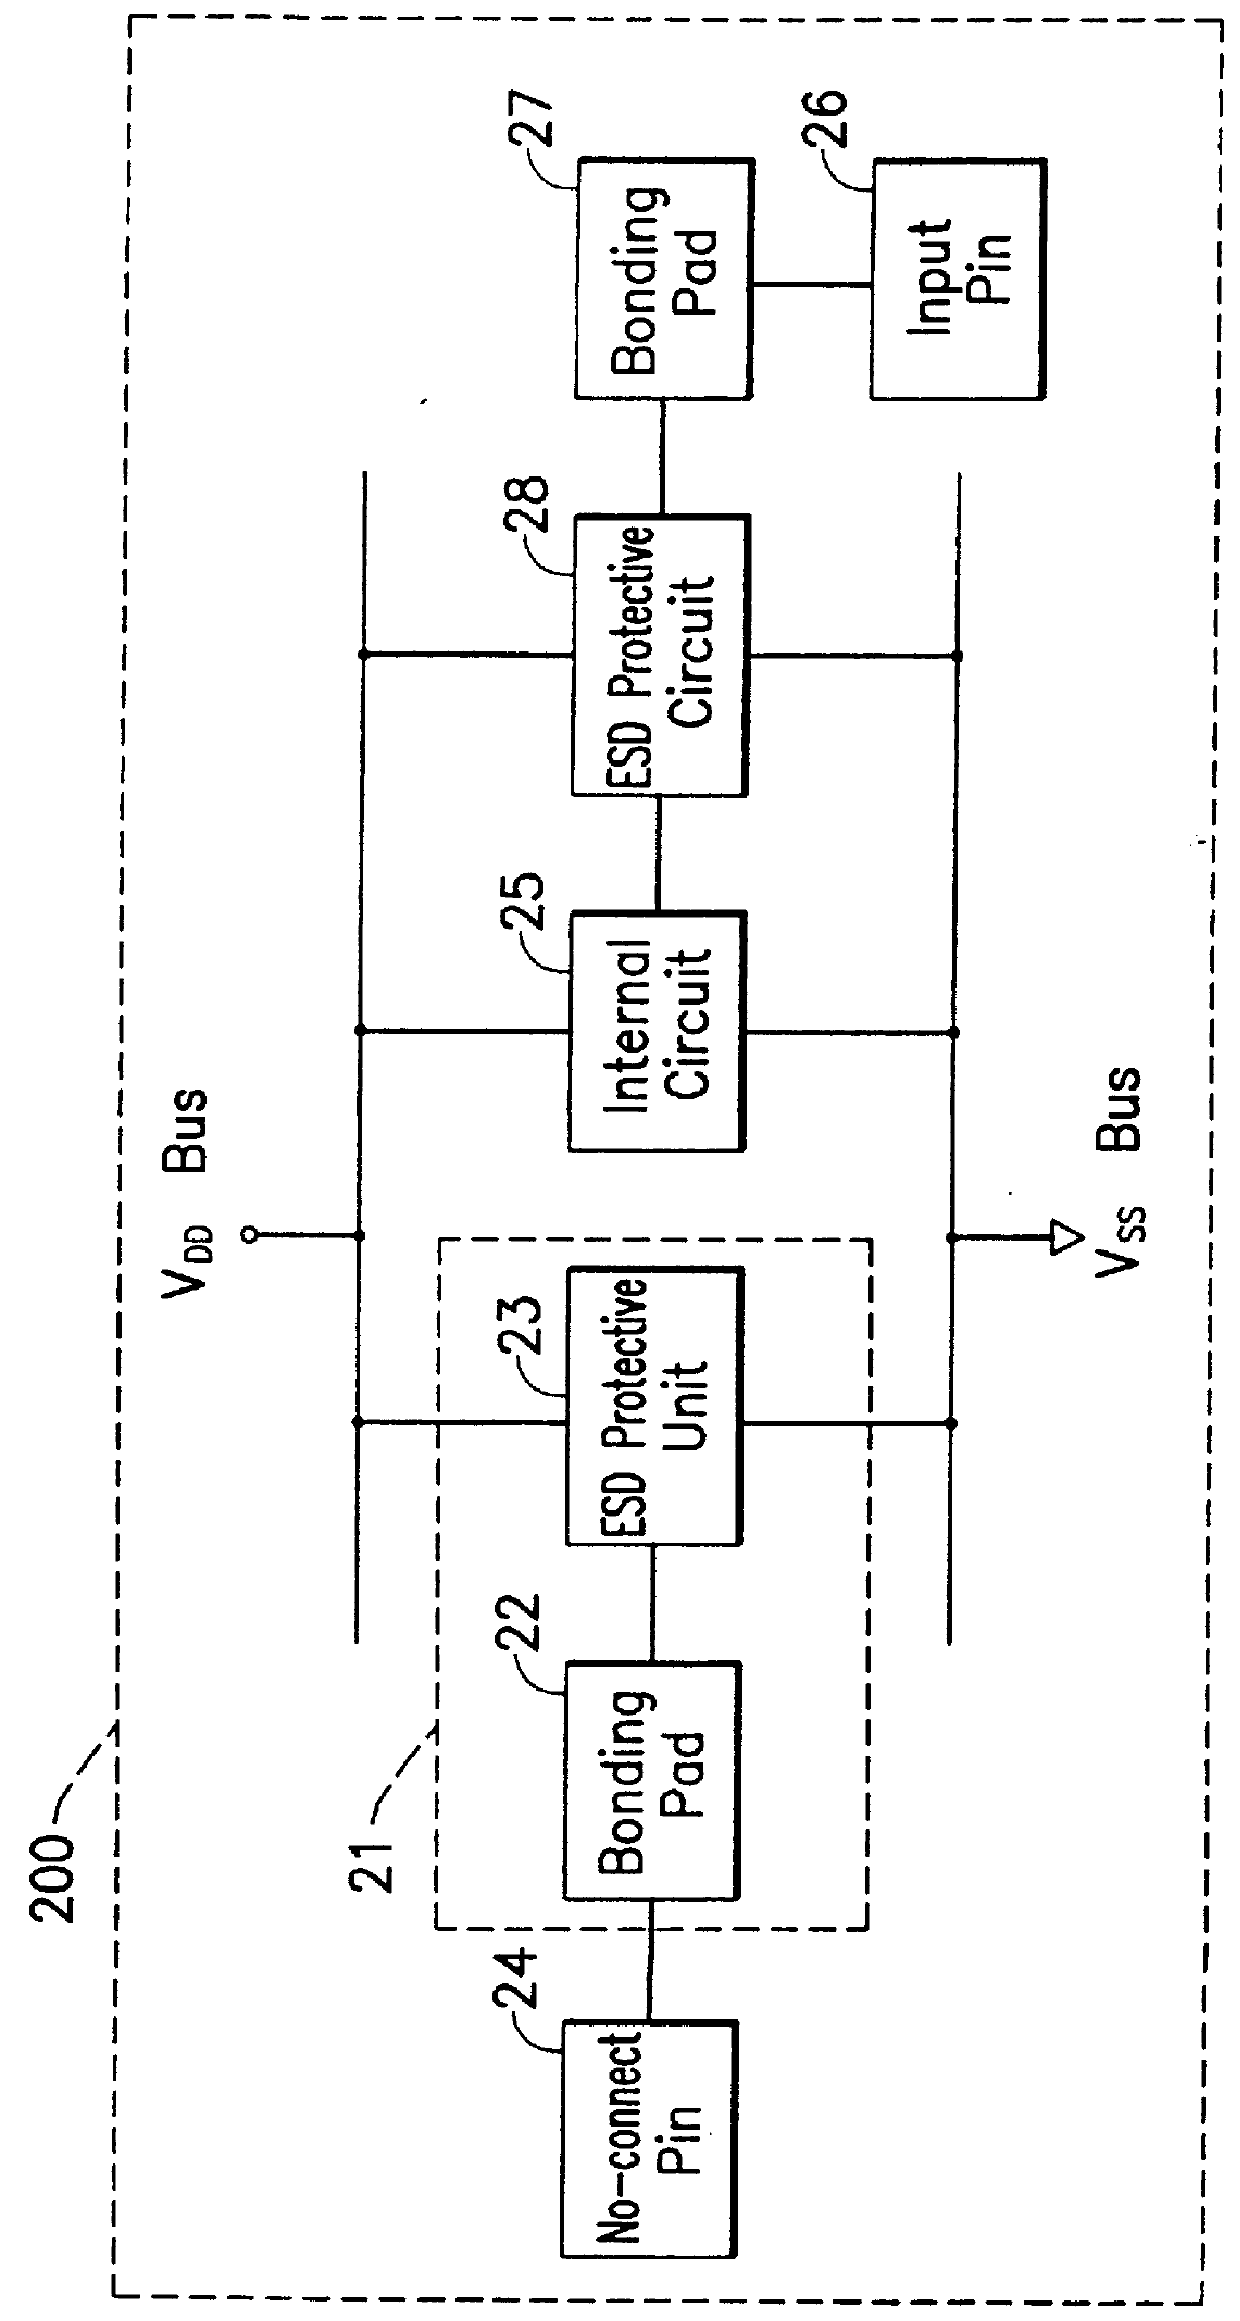 Electrostatic discharge (ESD) protective device for integrated circuit packages with no-connect pins